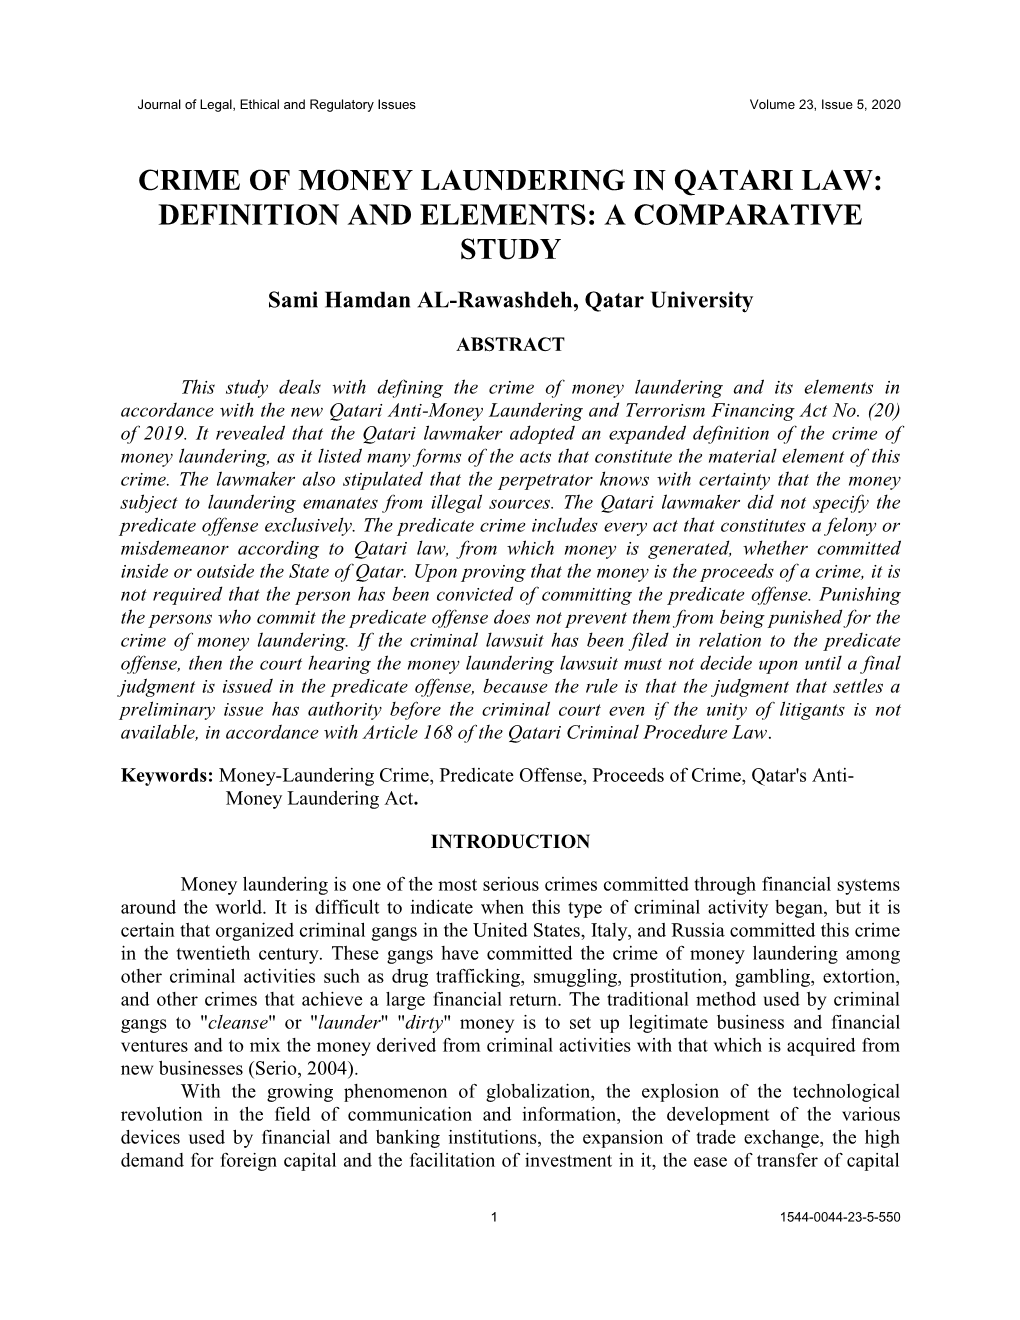 Crime of Money Laundering in Qatari Law: Definition and Elements: a Comparative Study